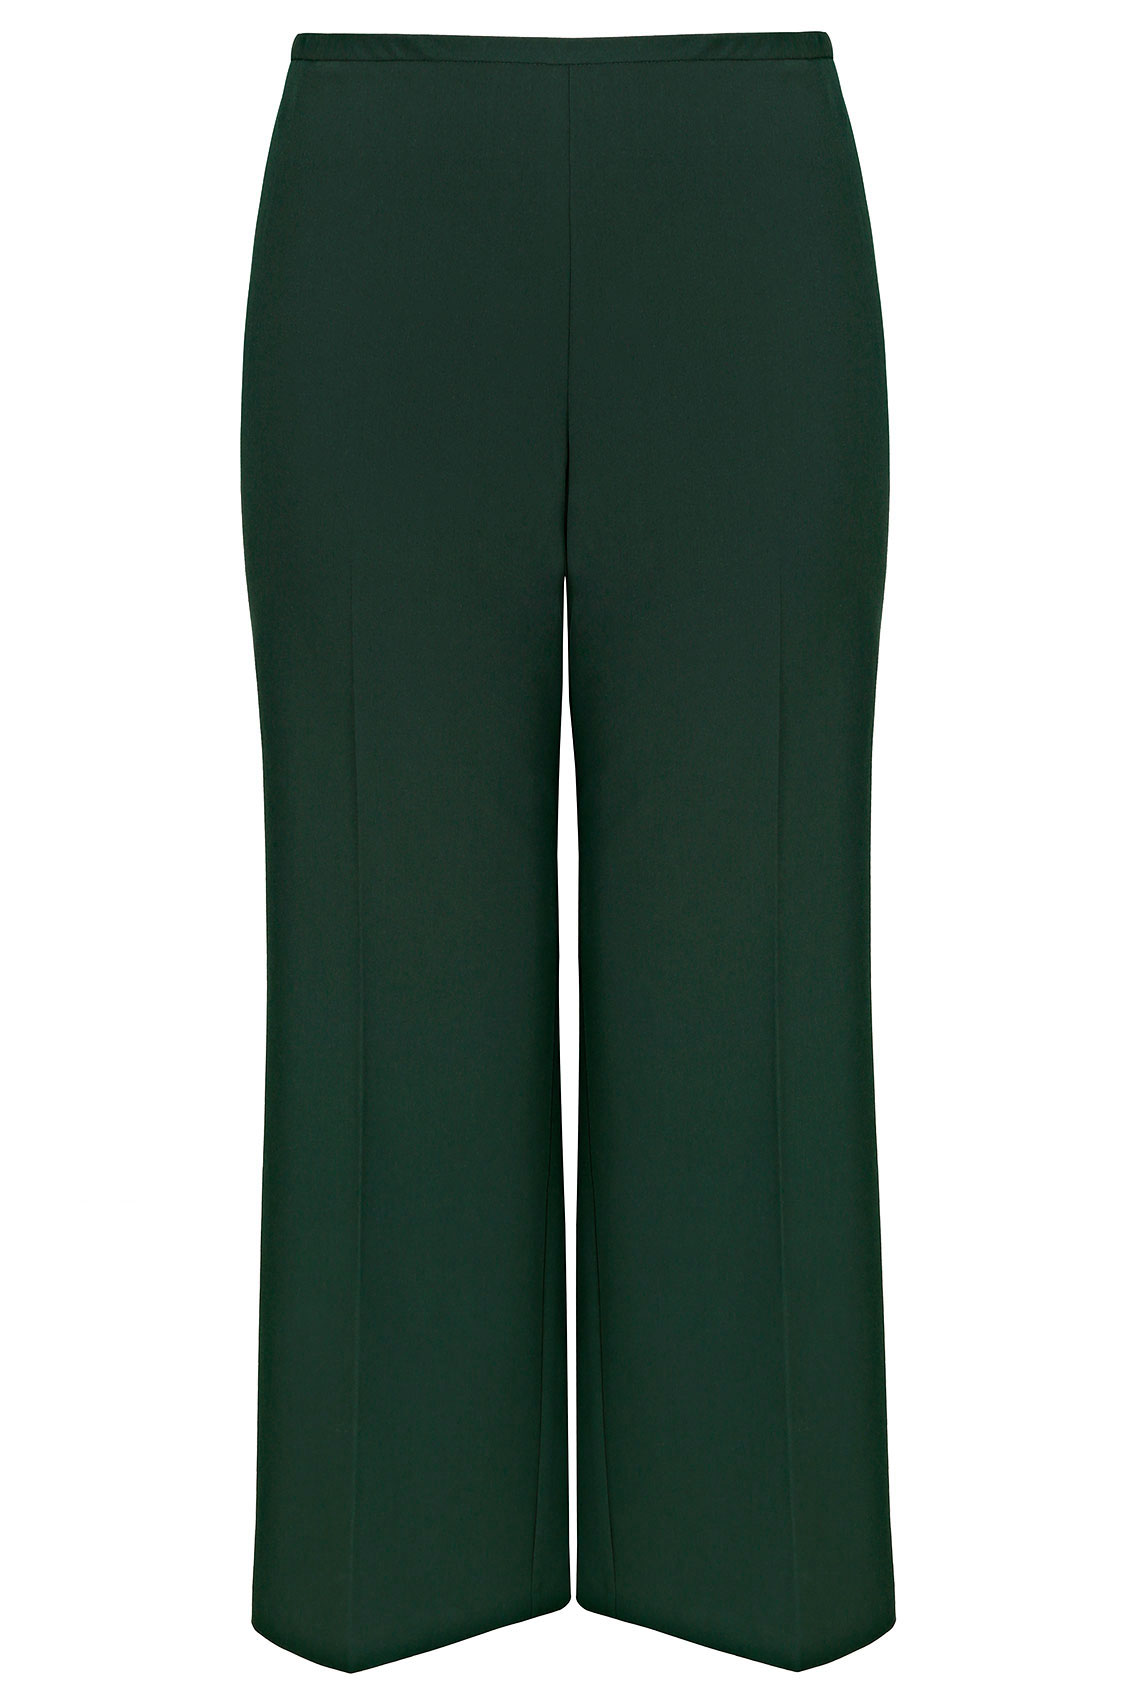 Dark Green Wide Leg Trousers Plus Size 16 to 36